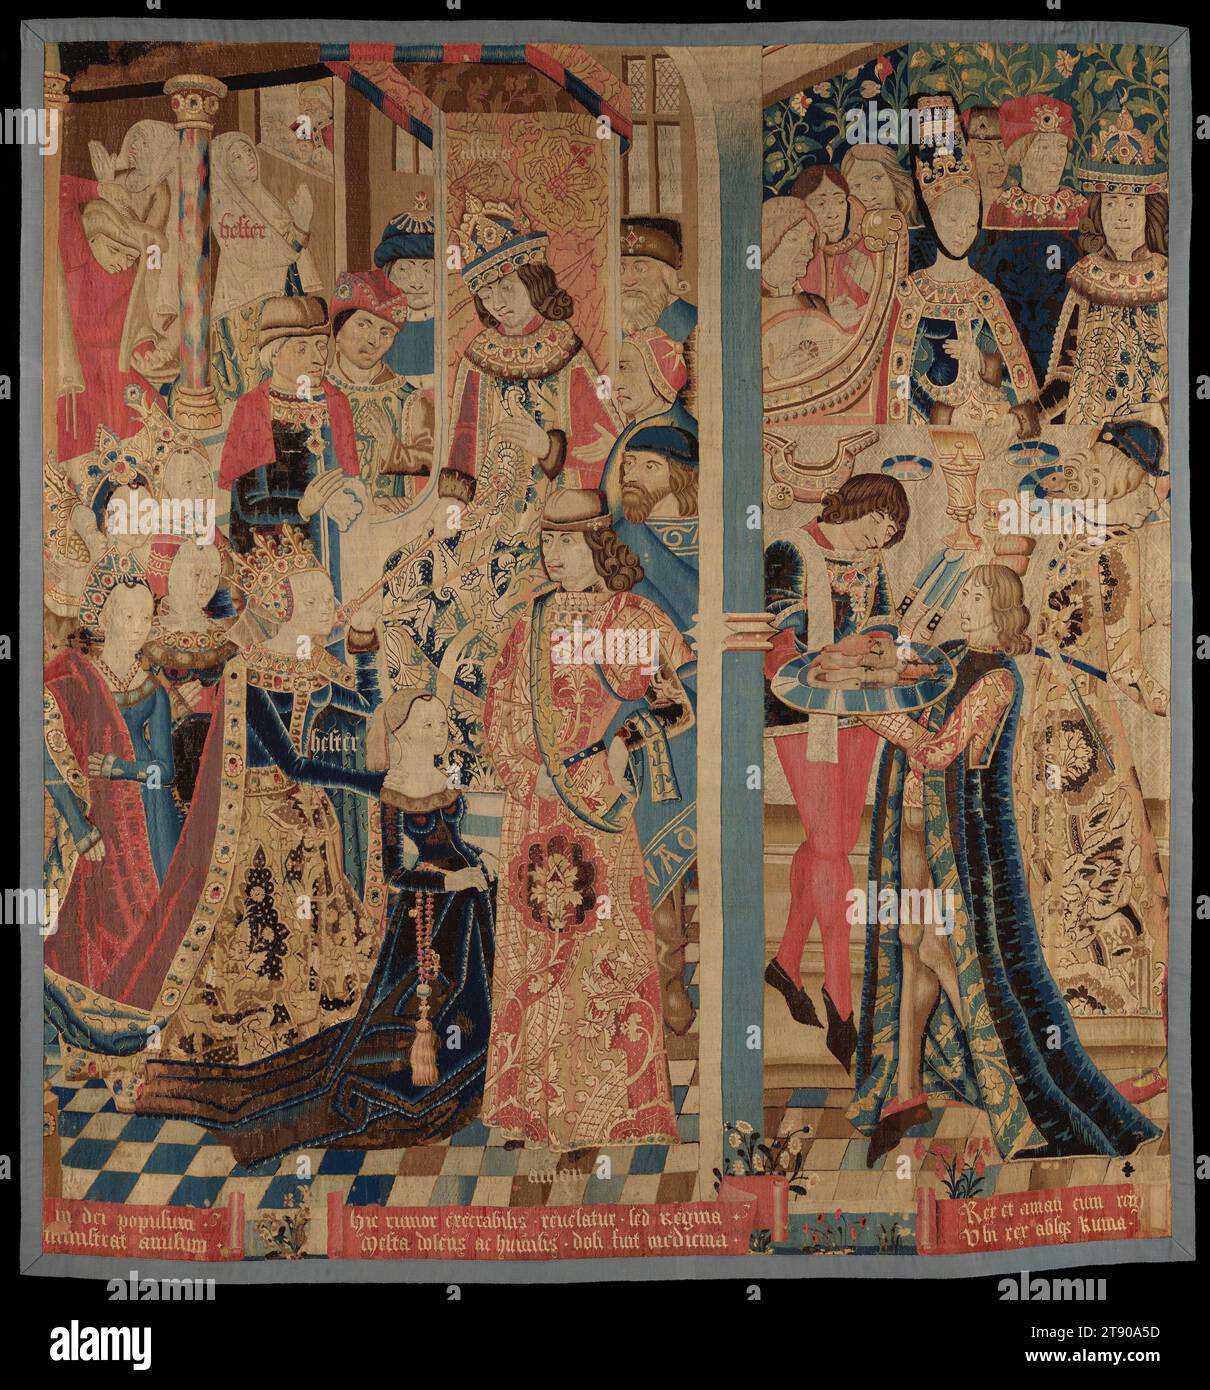 Esther and Ahasuerus, c. 1460-1485, 134 3/4 x 128 in. (342.27 x 325.12 cm) (irregular), Wool, silk; tapestry weave, Flanders, 15th century, This tapestry depicts several scenes from the Old Testament story of Esther. A beautiful young Jewish woman, Esther, was the queen of King Ahasuerus of Persia. When the king’s chief advisor, Haman, ordered all the Jews in Persia killed, Esther appealed to the king. At the left, Ahasuerus receives Esther and agrees to attend a banquet she has prepared. At the banquet (right), Esther asks Ahasuerus, who had not known she was Jewish, to spare her people. Stock Photo